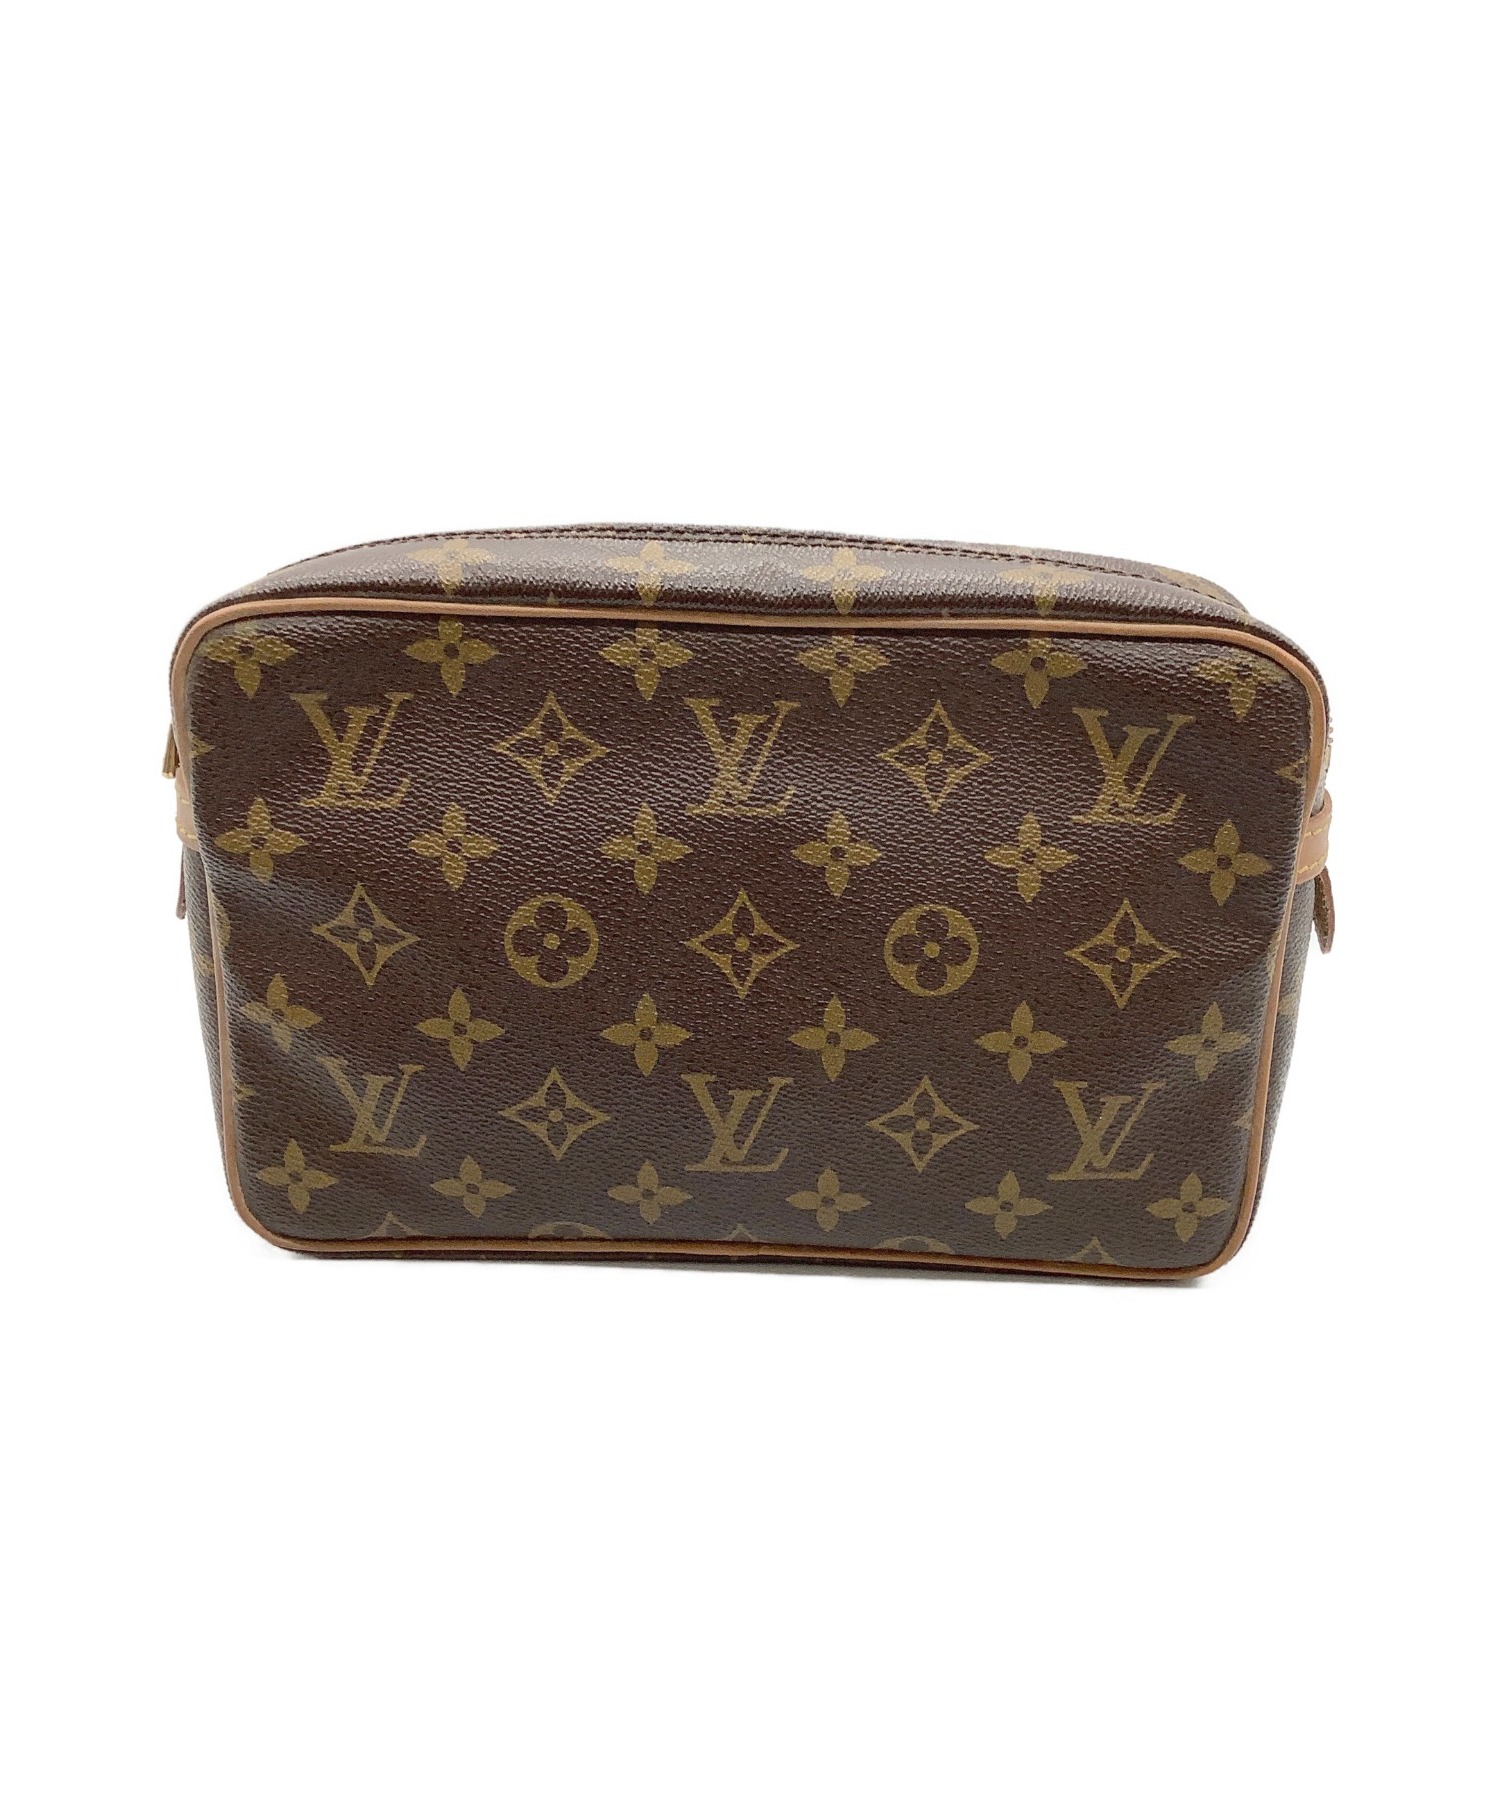 LOUIS VUITTON (ルイ ヴィトン) コンピエーニュ23 モノグラム コンピエーニュ23 M51847 883 TH